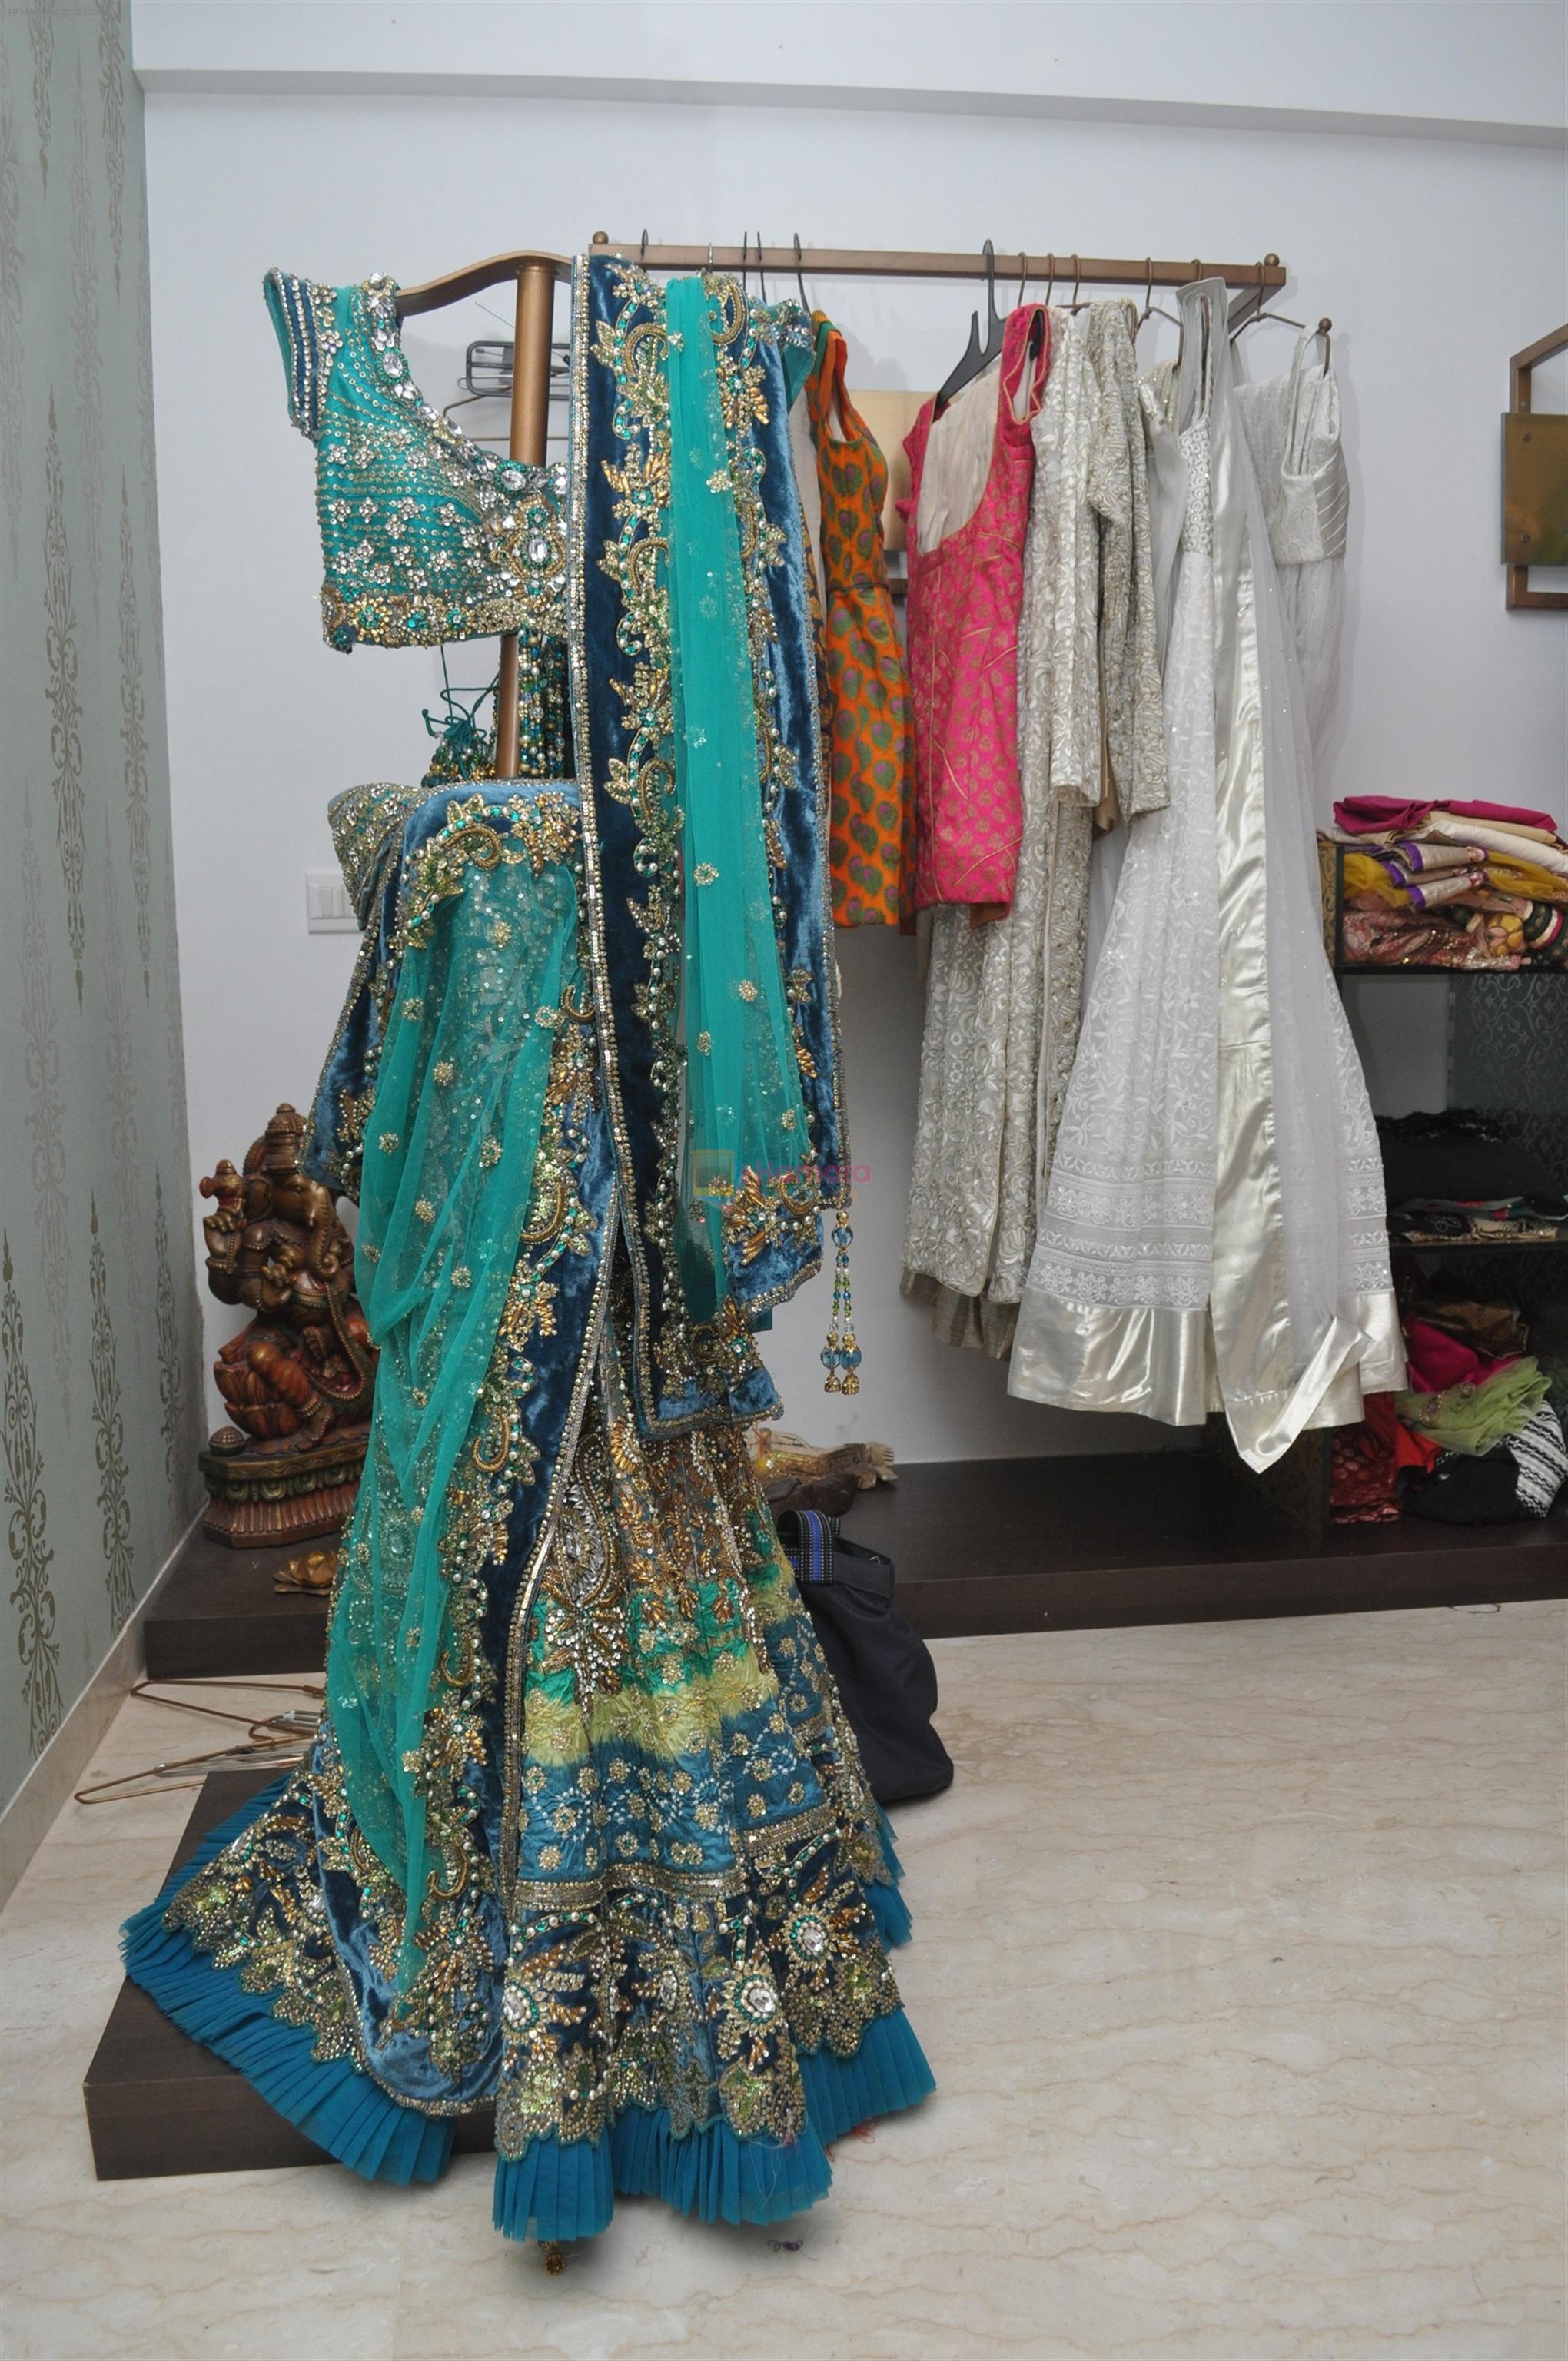 Model at Amy Billimoria's fittings of the models for her upcoming show sparkiling desires forever